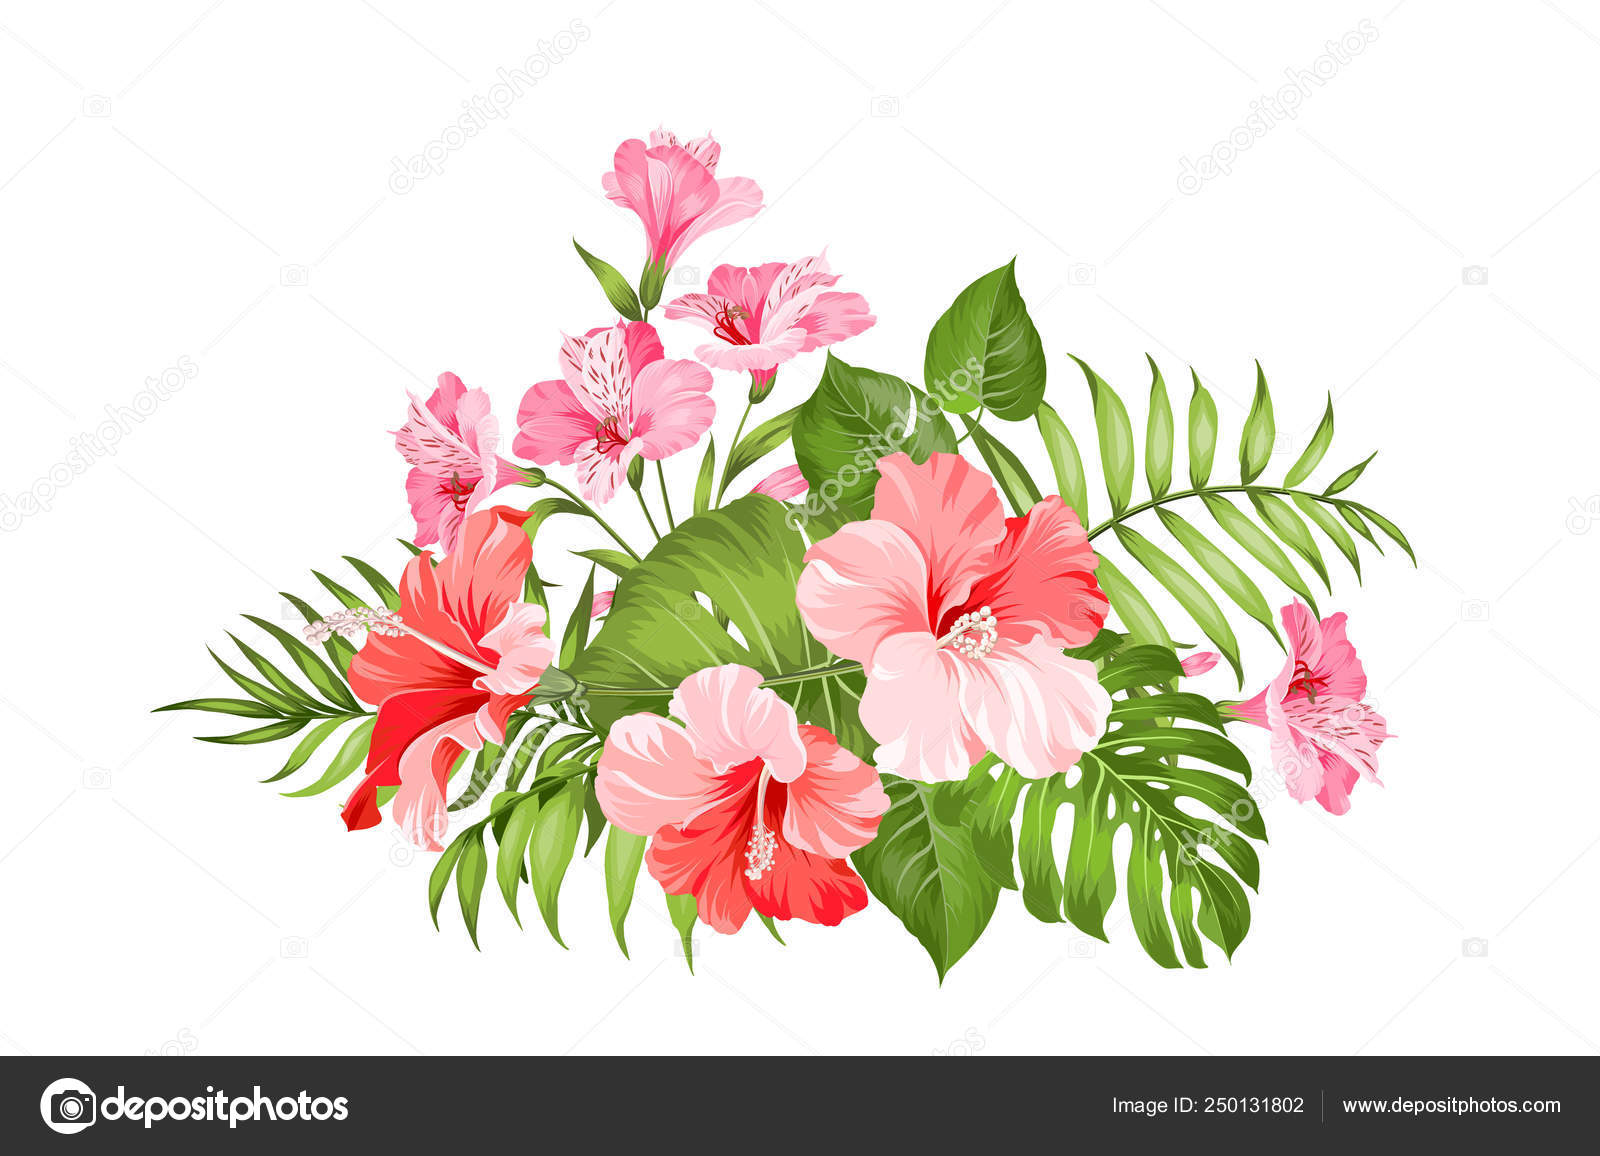 Exotic Flowers Bouquet Of Color Bud Garland Label With Hibiscus Flowers Bouquet Of Aromatic Tropical Flowers Invitation Card Template With Color Flowers Of Alstroemeria Stock Vector C Kotkoa 250131802